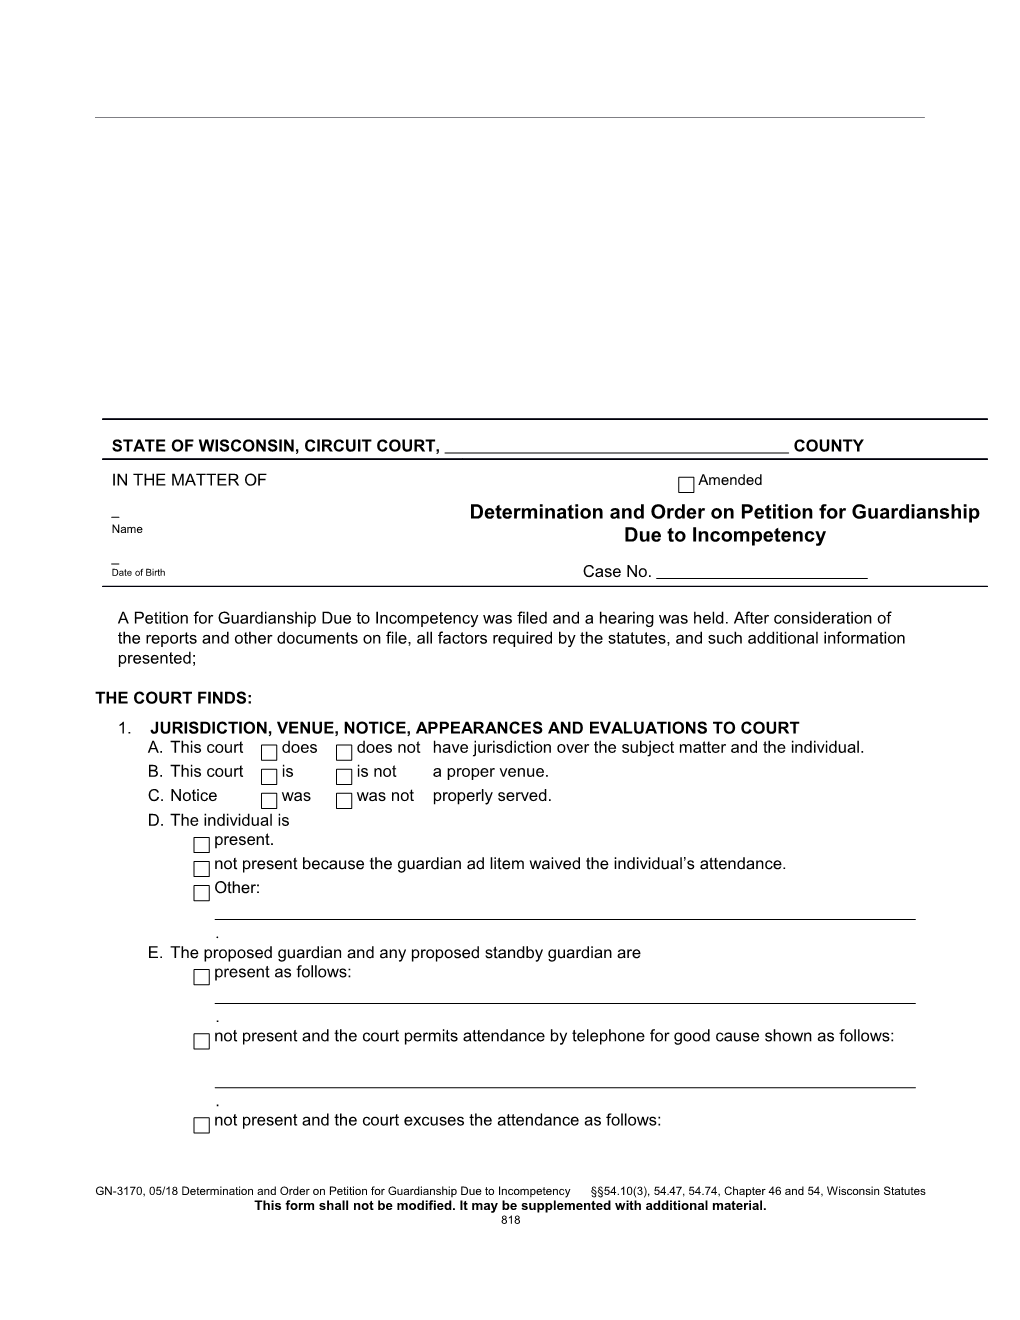 GN-3170: Determination and Order on Petition for Guardianship Due to Incompetency